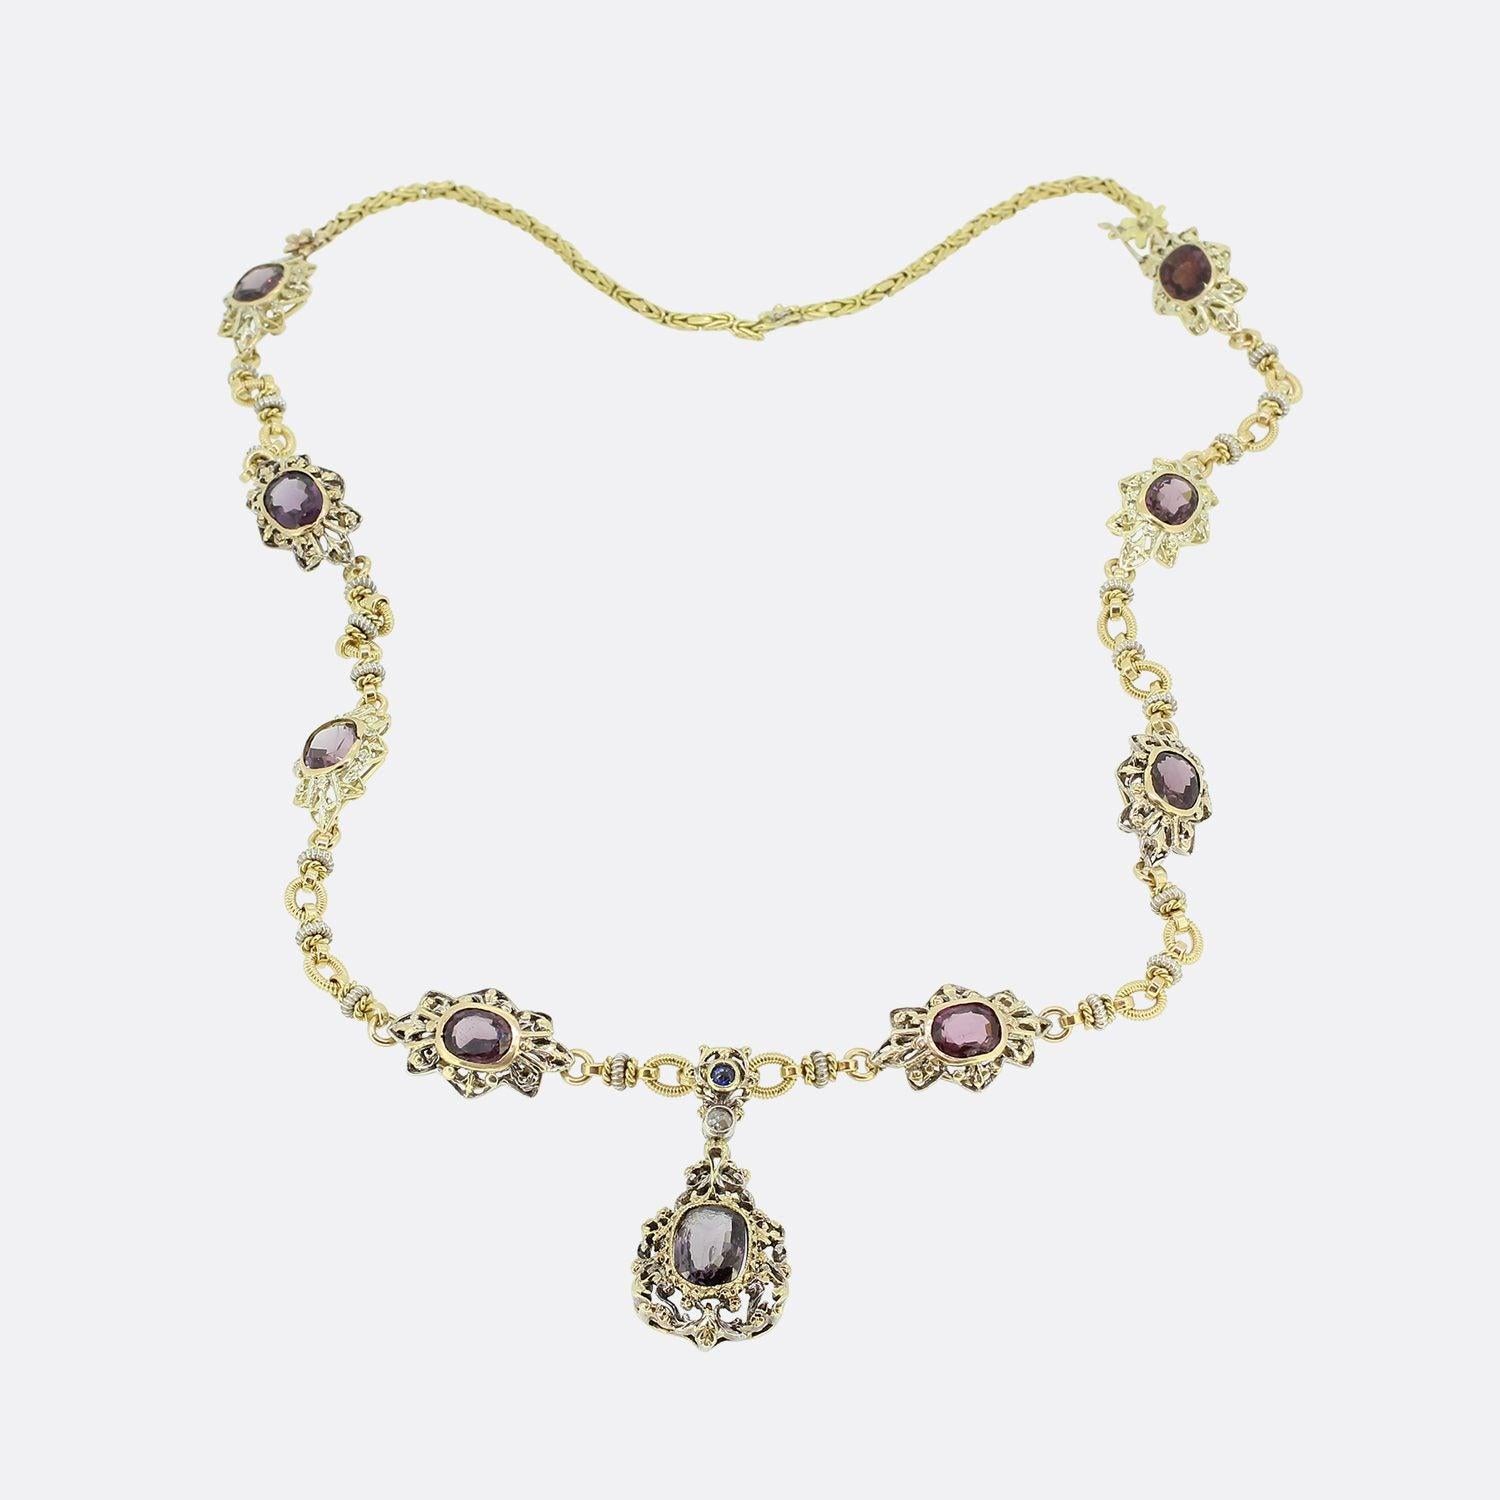 This is a vintage 18ct yellow gold spinel necklace featuring eight cushion cut natural Burmese spinels which have been rubover set in 18ct yellow gold. The chain and setting has been hand crafted in a very unique and interesting style. Additionally,